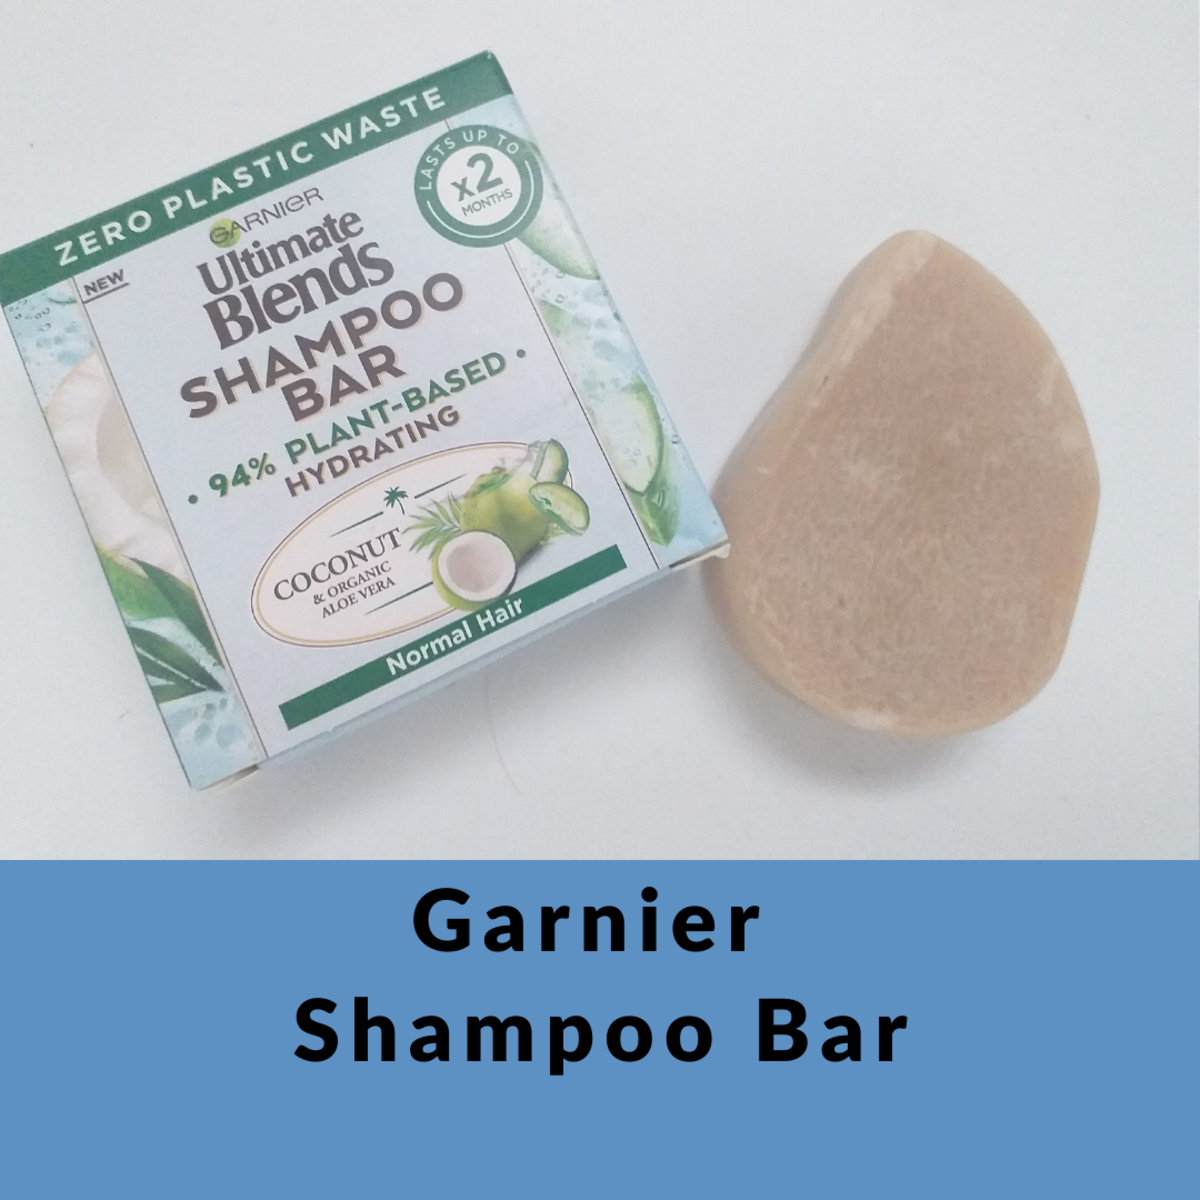 Garnier Whole Blends released their a shampoo bar for different types of hair